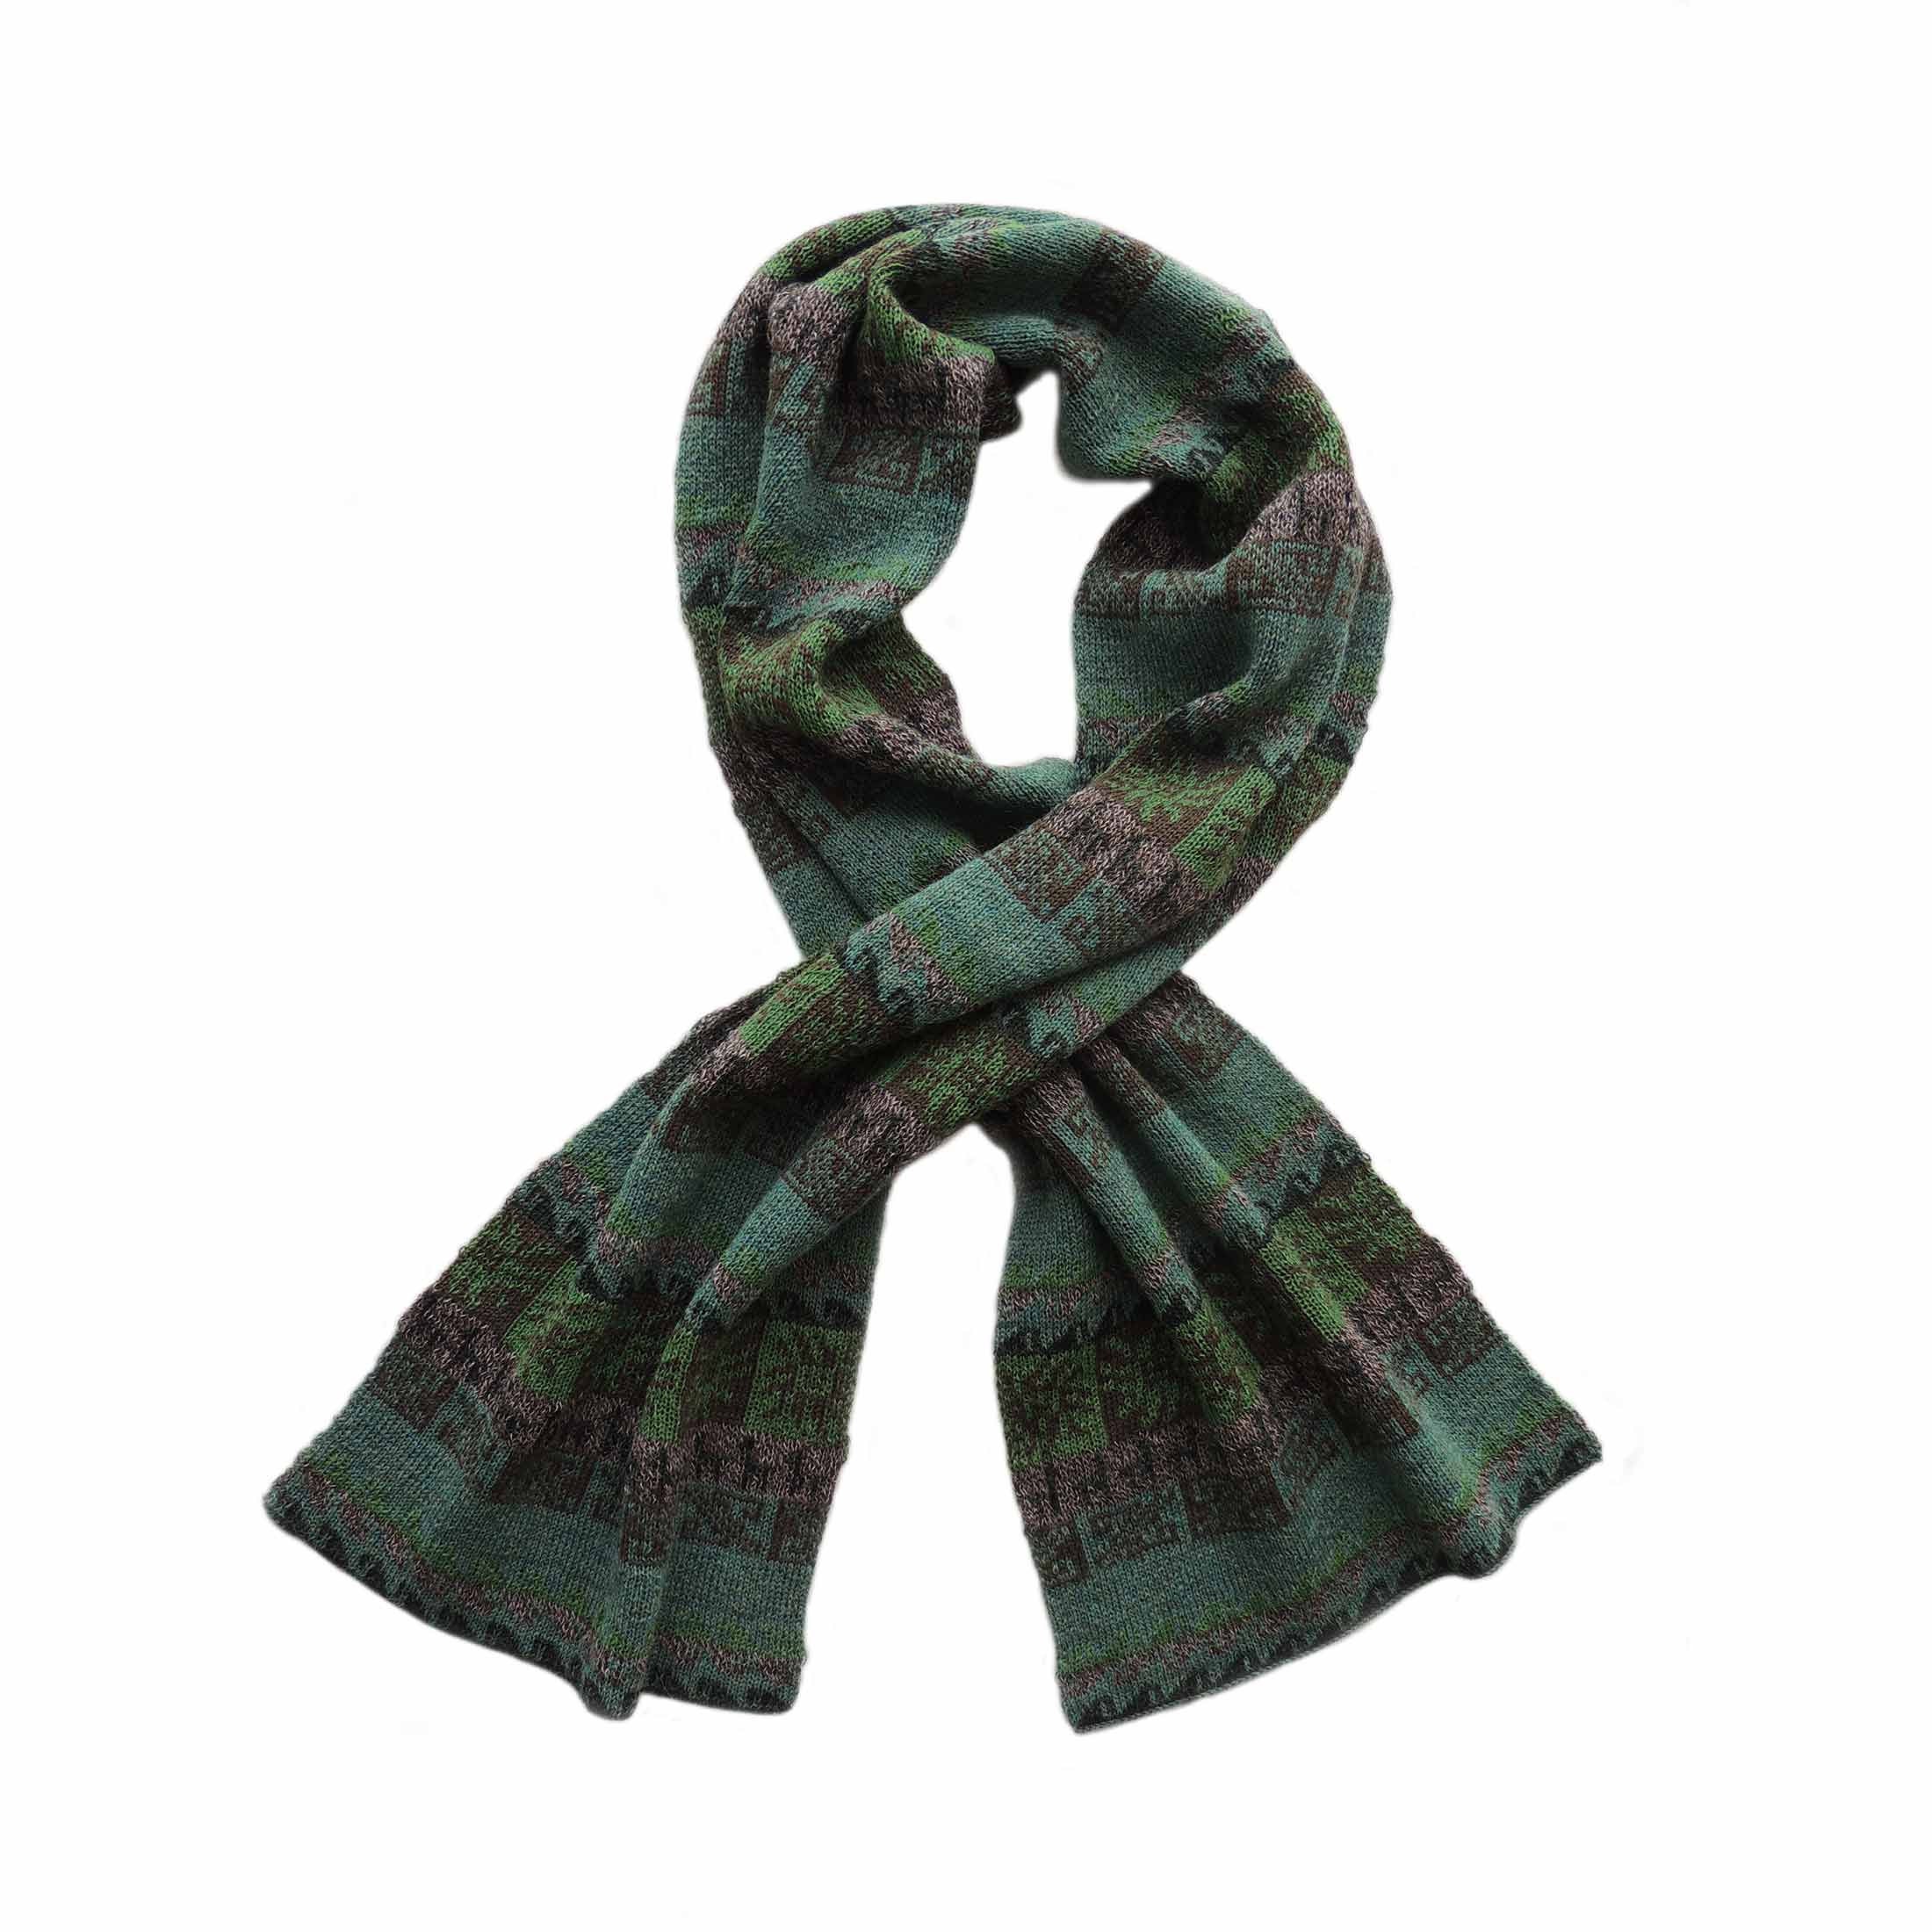 Scarf Alpaca Blend With Ethinic Pattern Jacquard Knitted Green - Multicolor Unisex